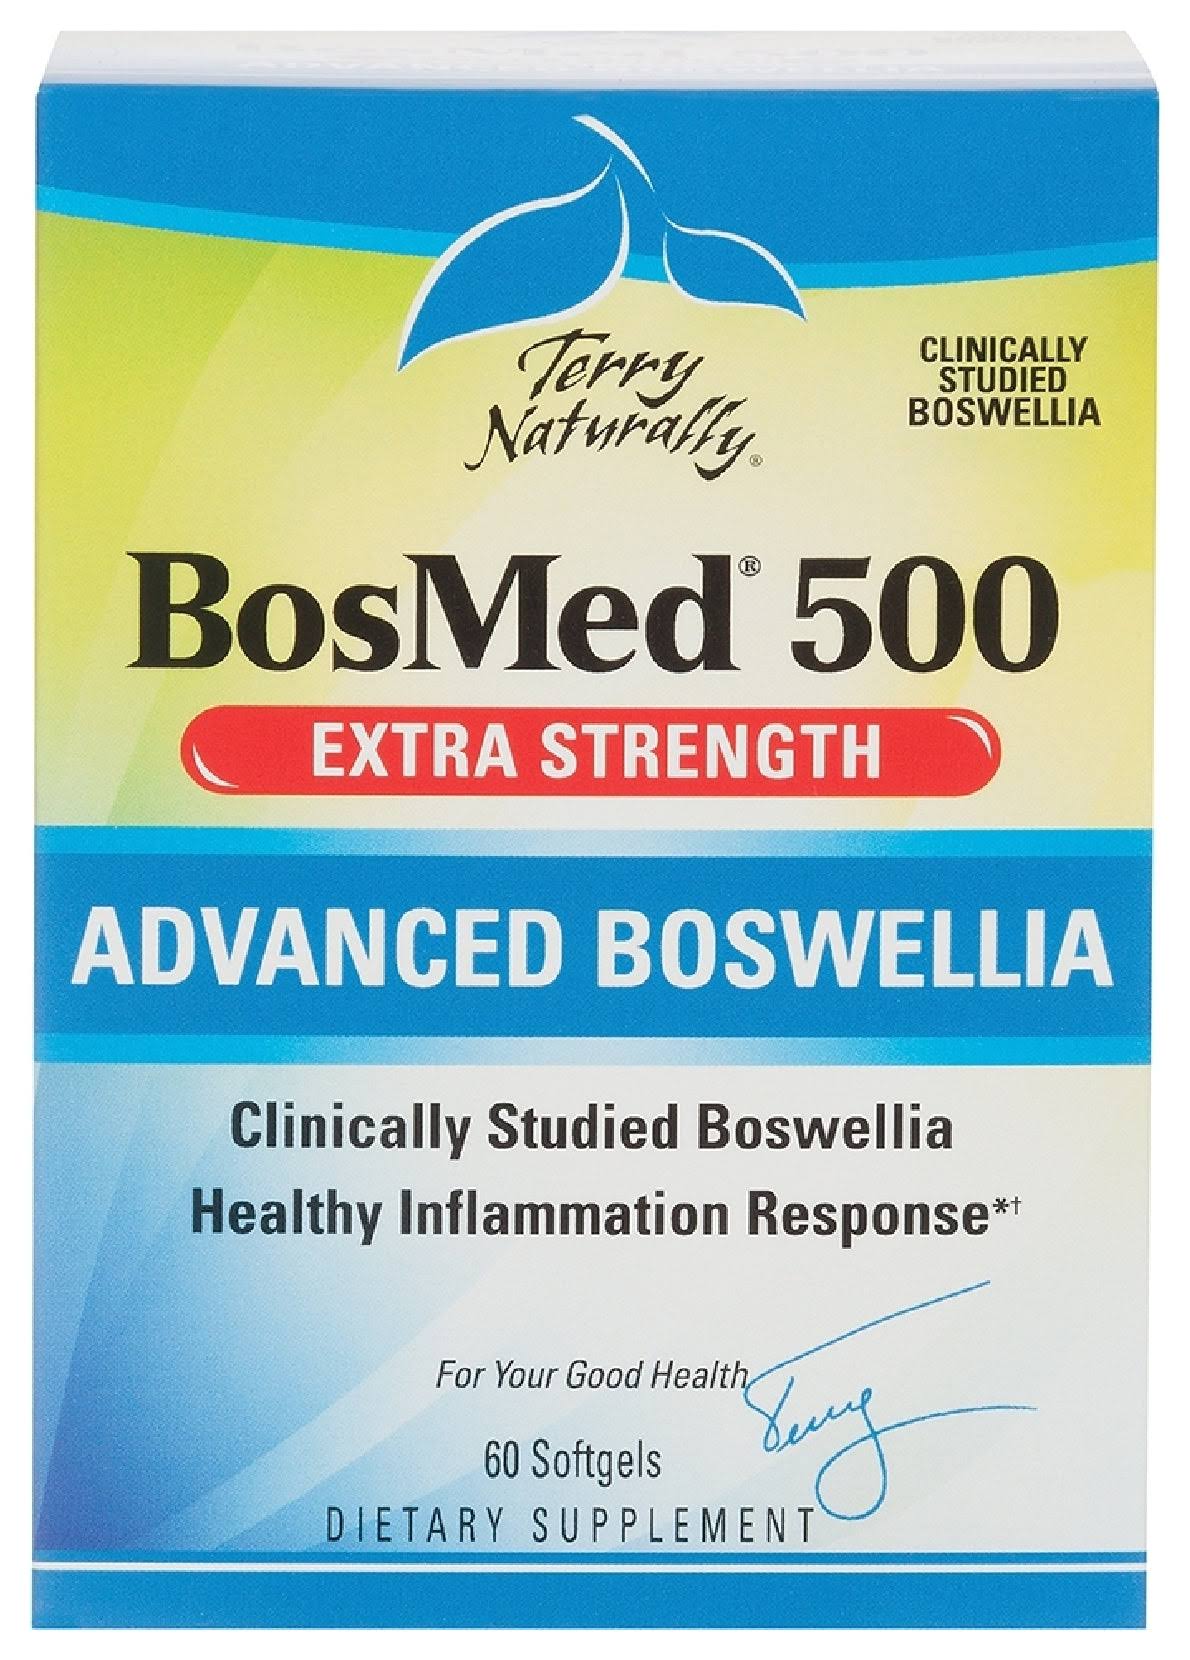 Bosmed 500 Advanced Boswellia Supplement - Extra Strength, 60 Softgels